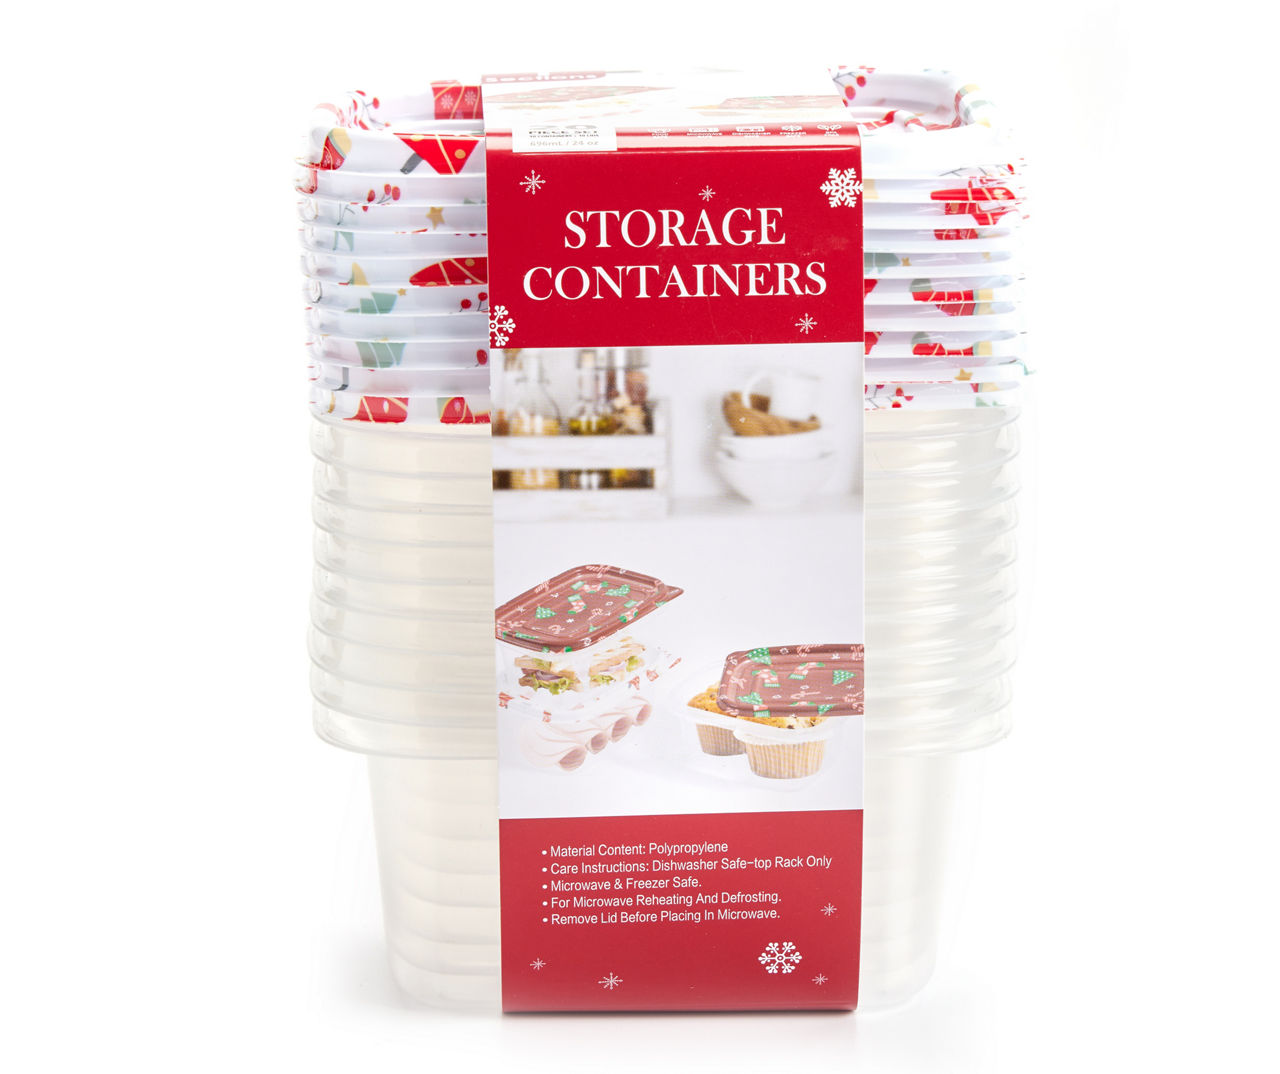 Set of Three Holiday Storage Containers